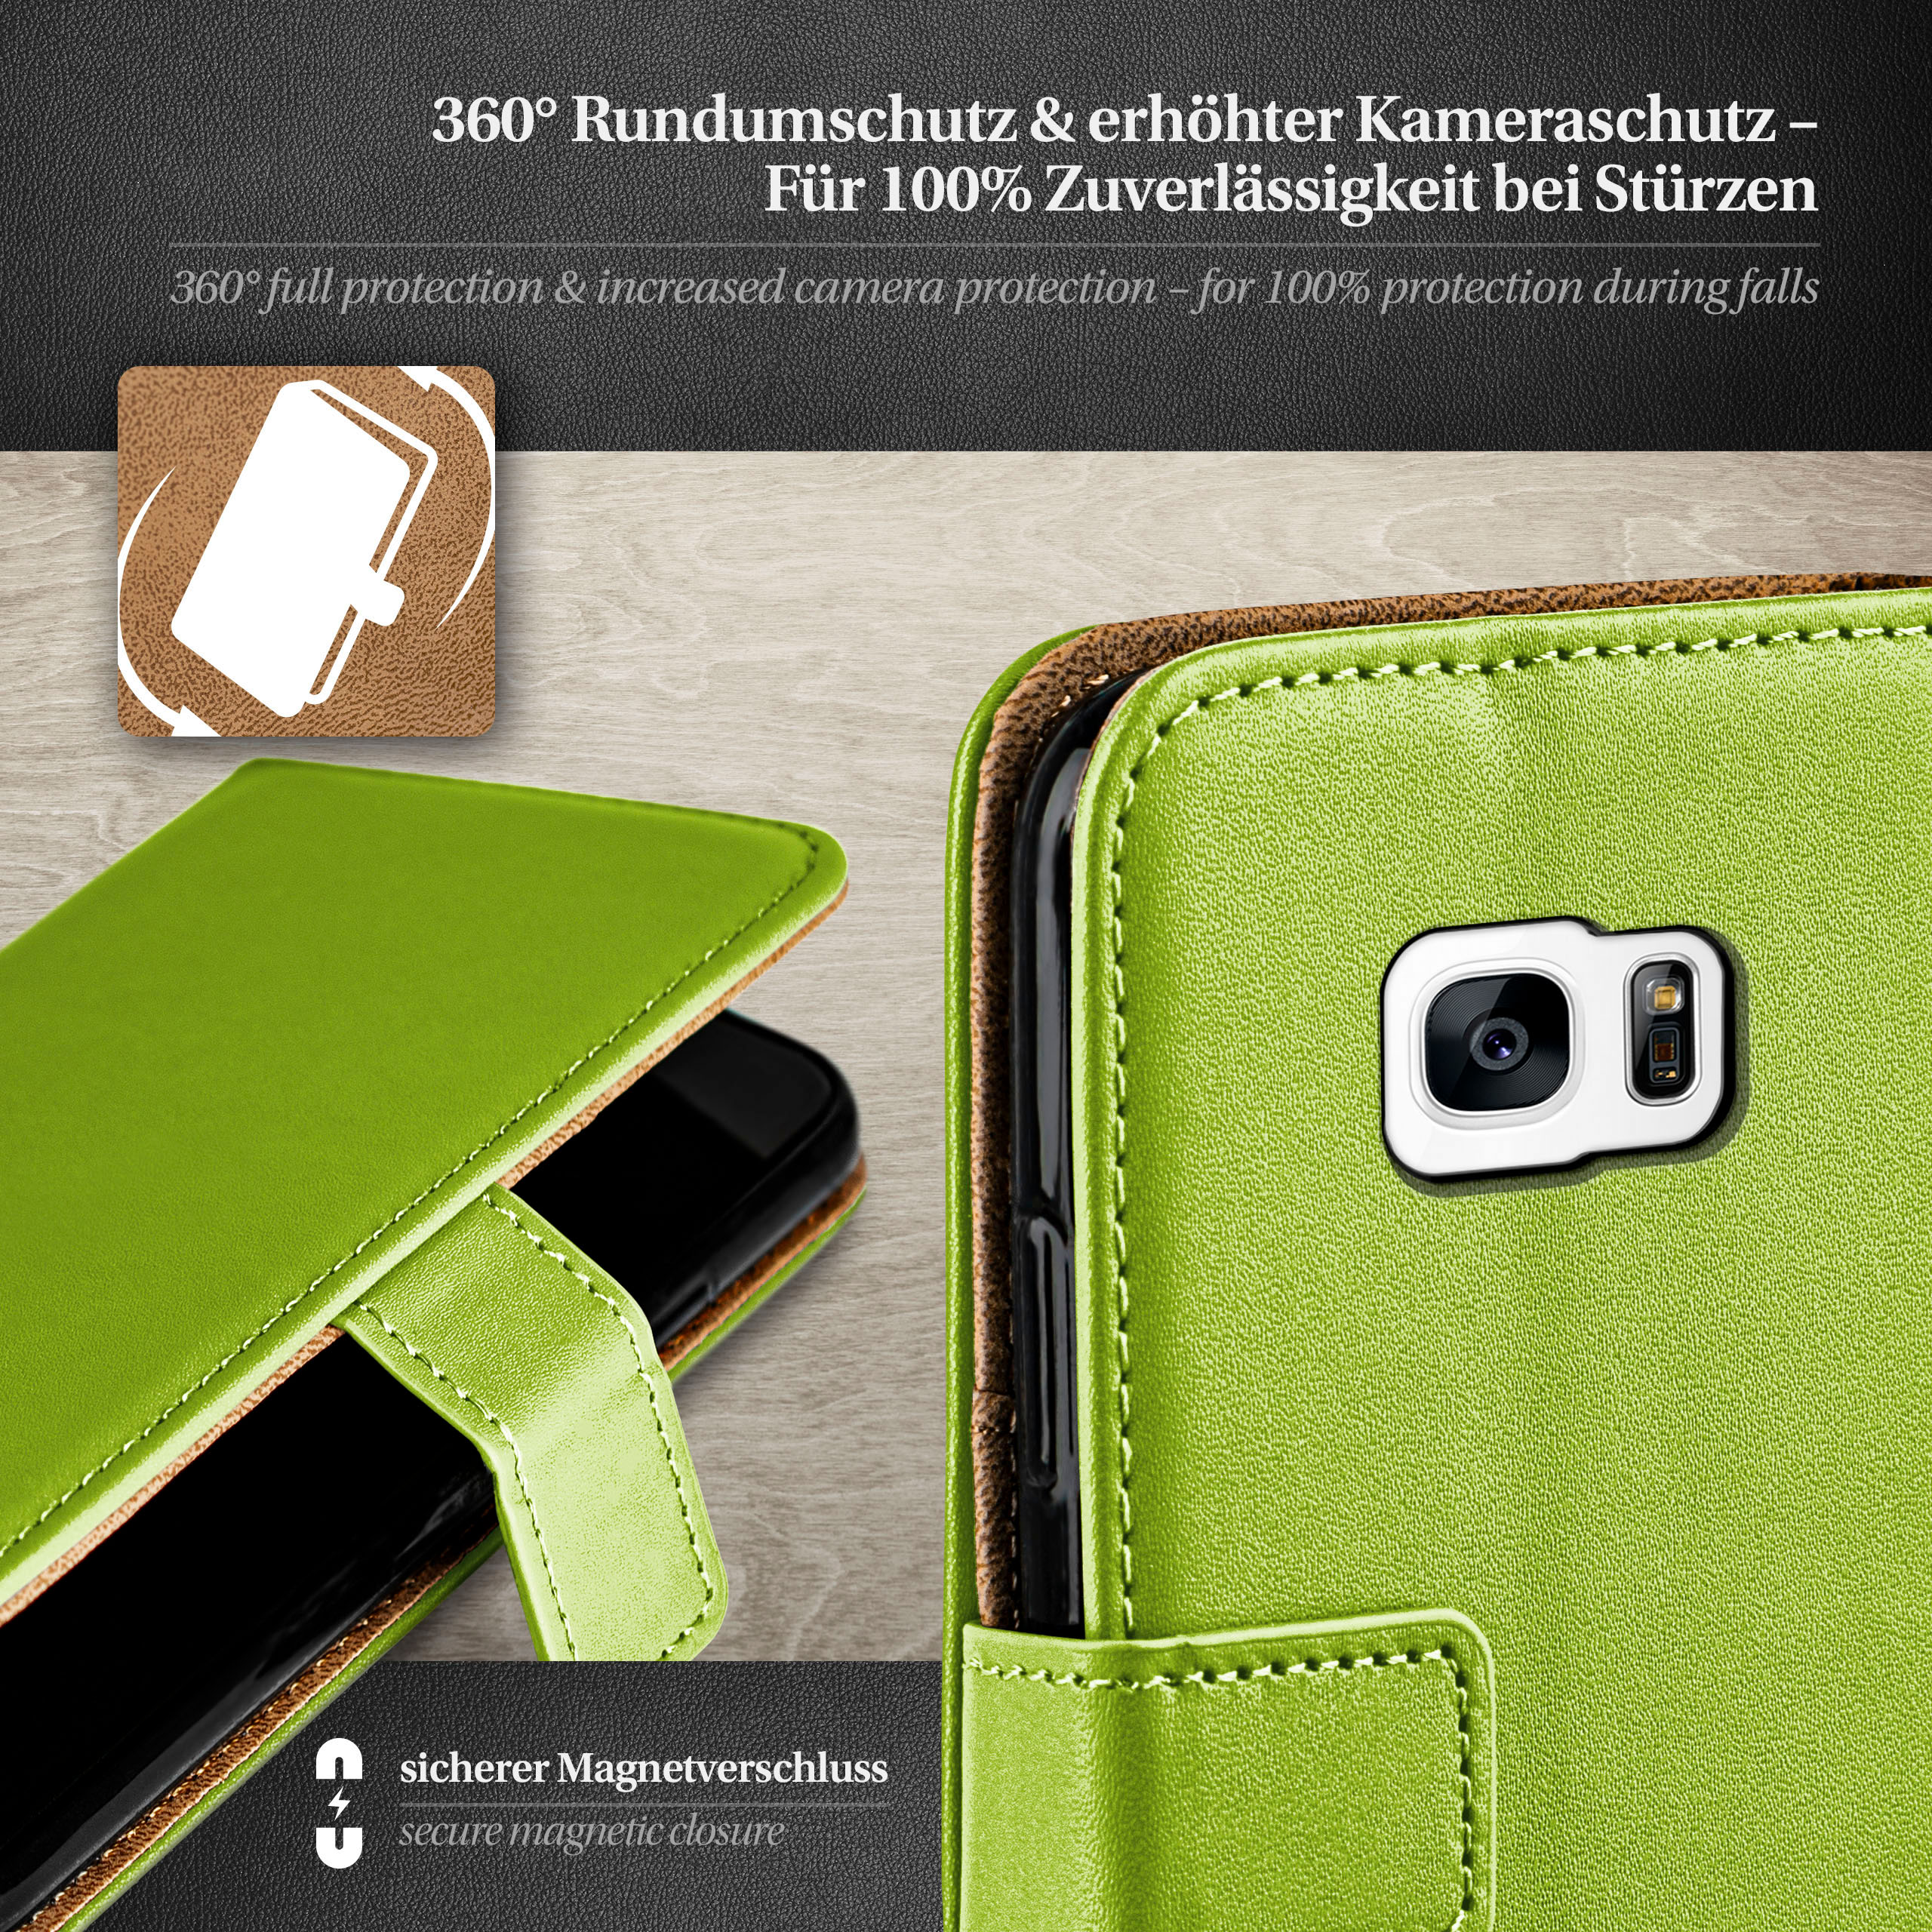 Bookcover, Samsung, S7 Case, MOEX Galaxy Edge, Book Lime-Green